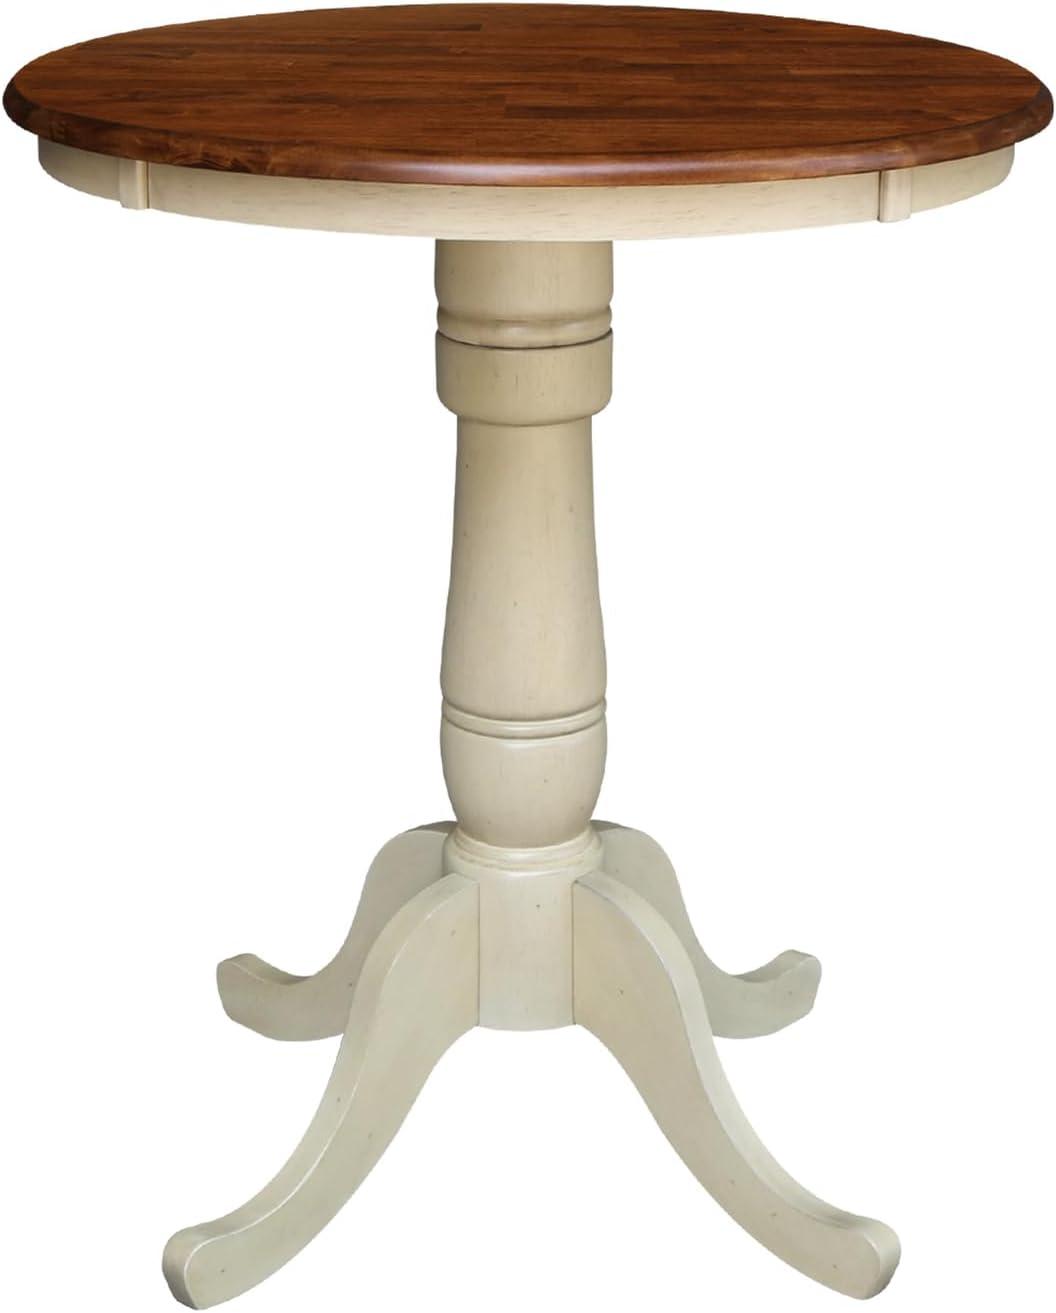 Almond & Espresso Dual-Tone Round Wood Counter Height Table